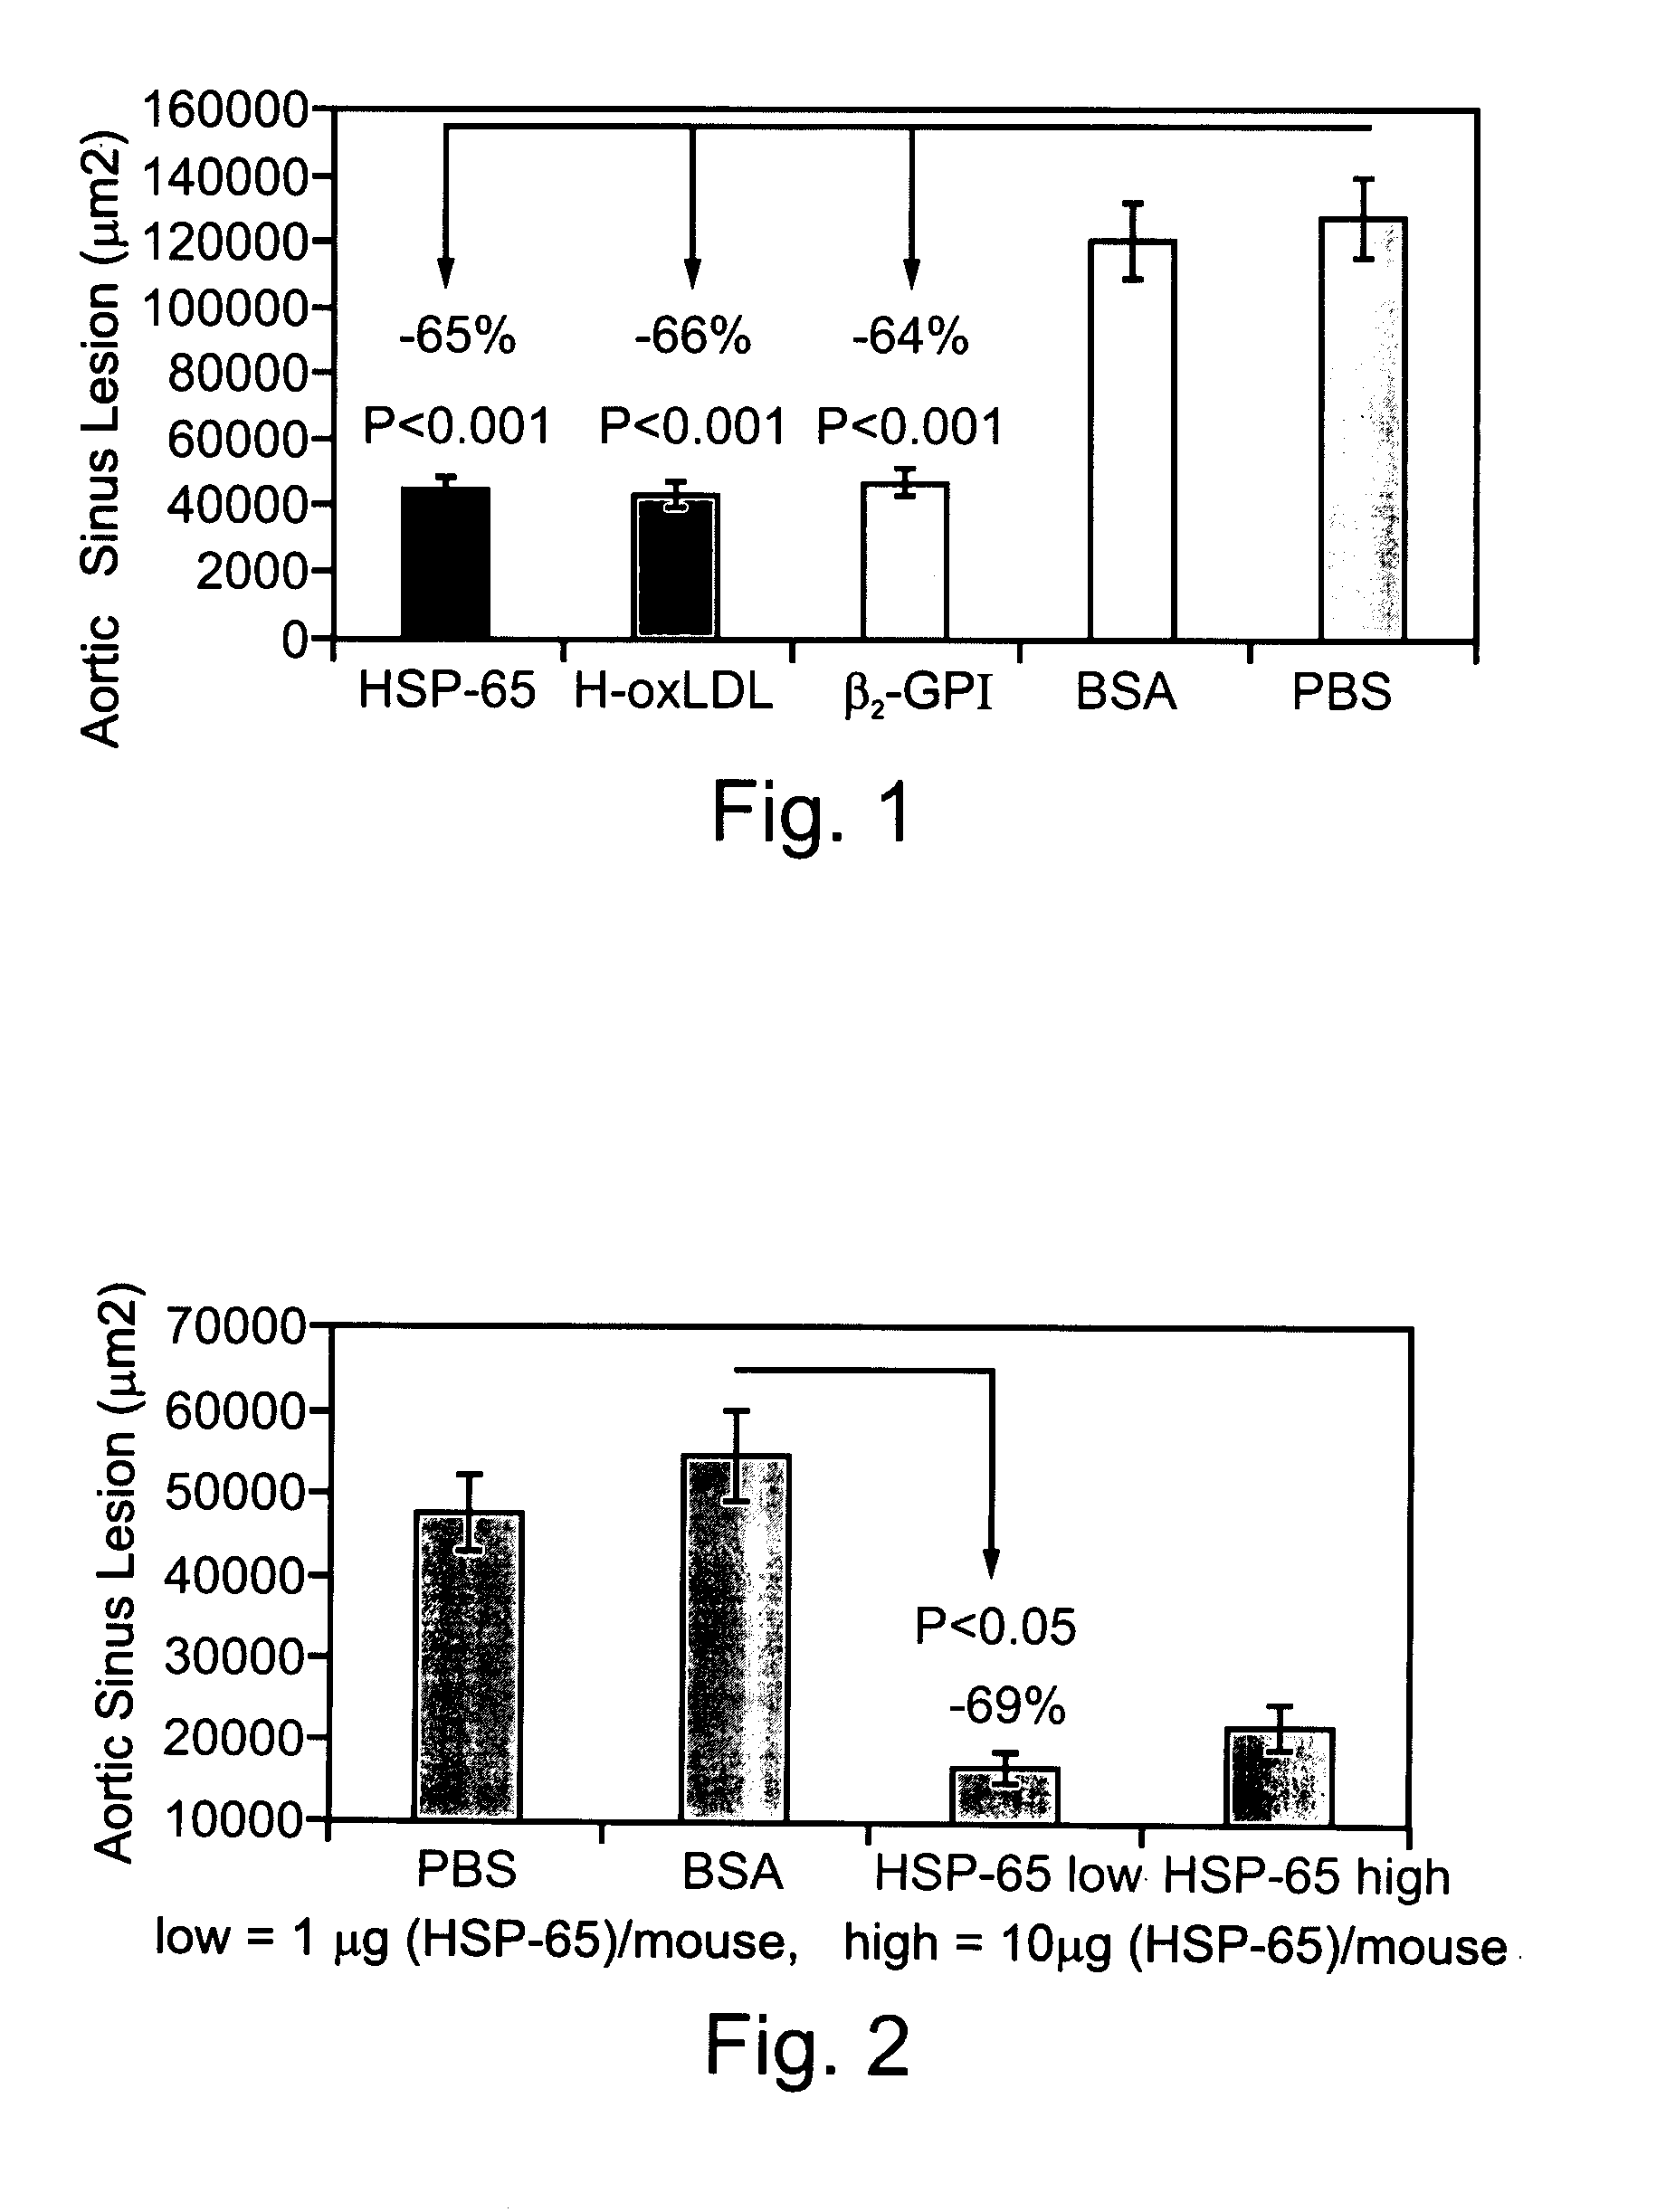 Compositions Containing Beta 2-Glycoprotein I-Derived Peptides for the Prevention and/or Treatment of Vascular Disease